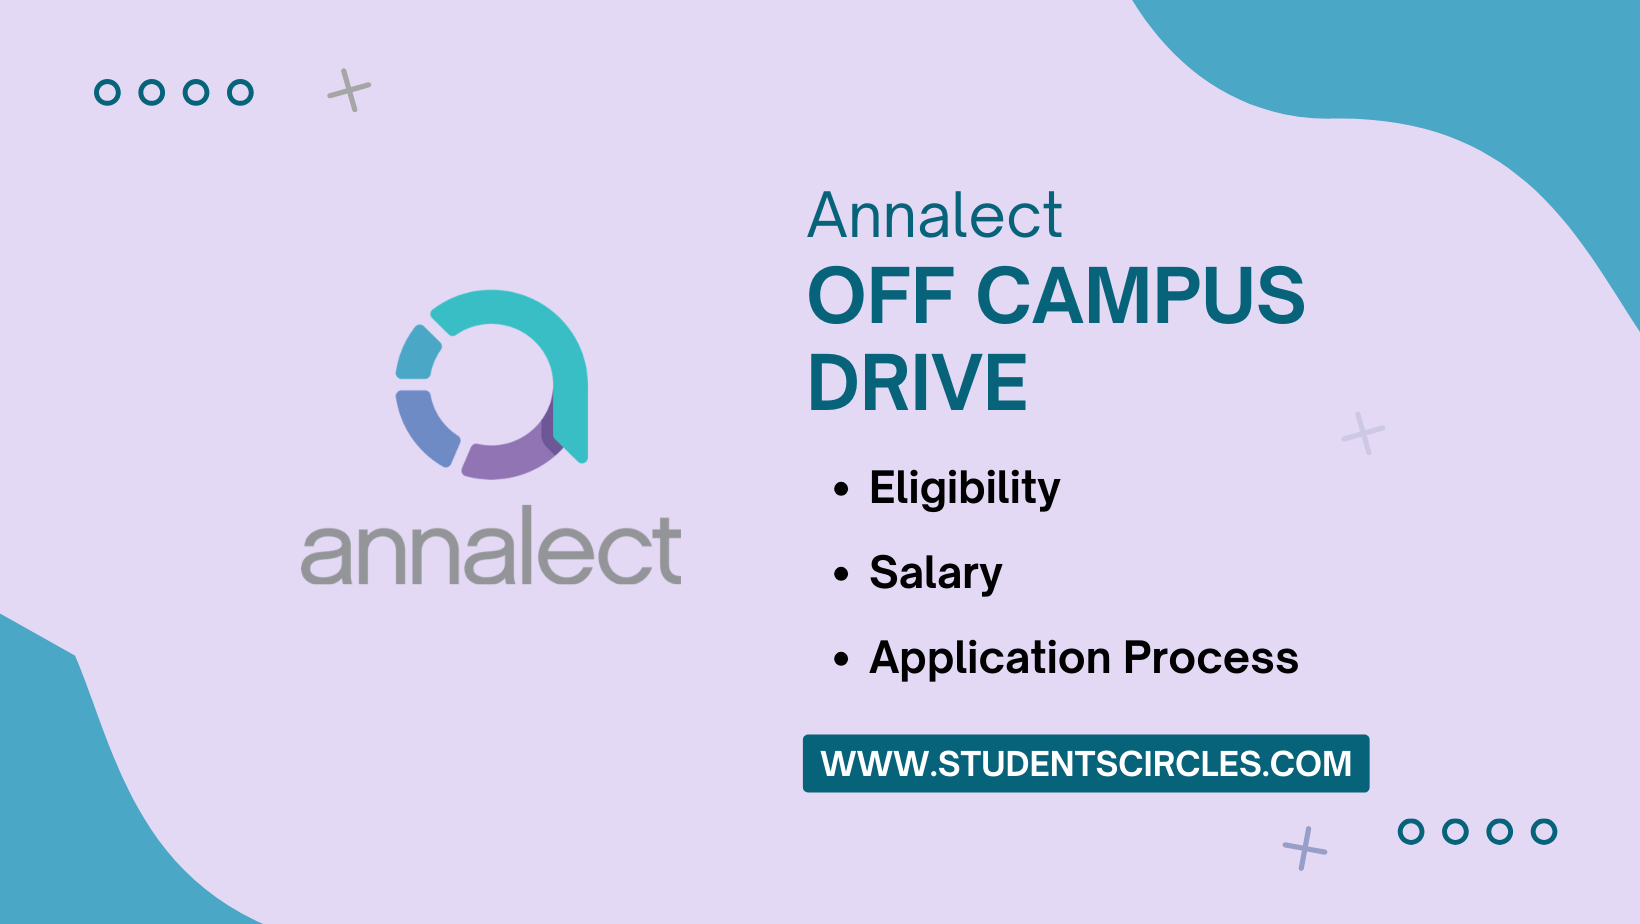 Annalect Off Campus Drive